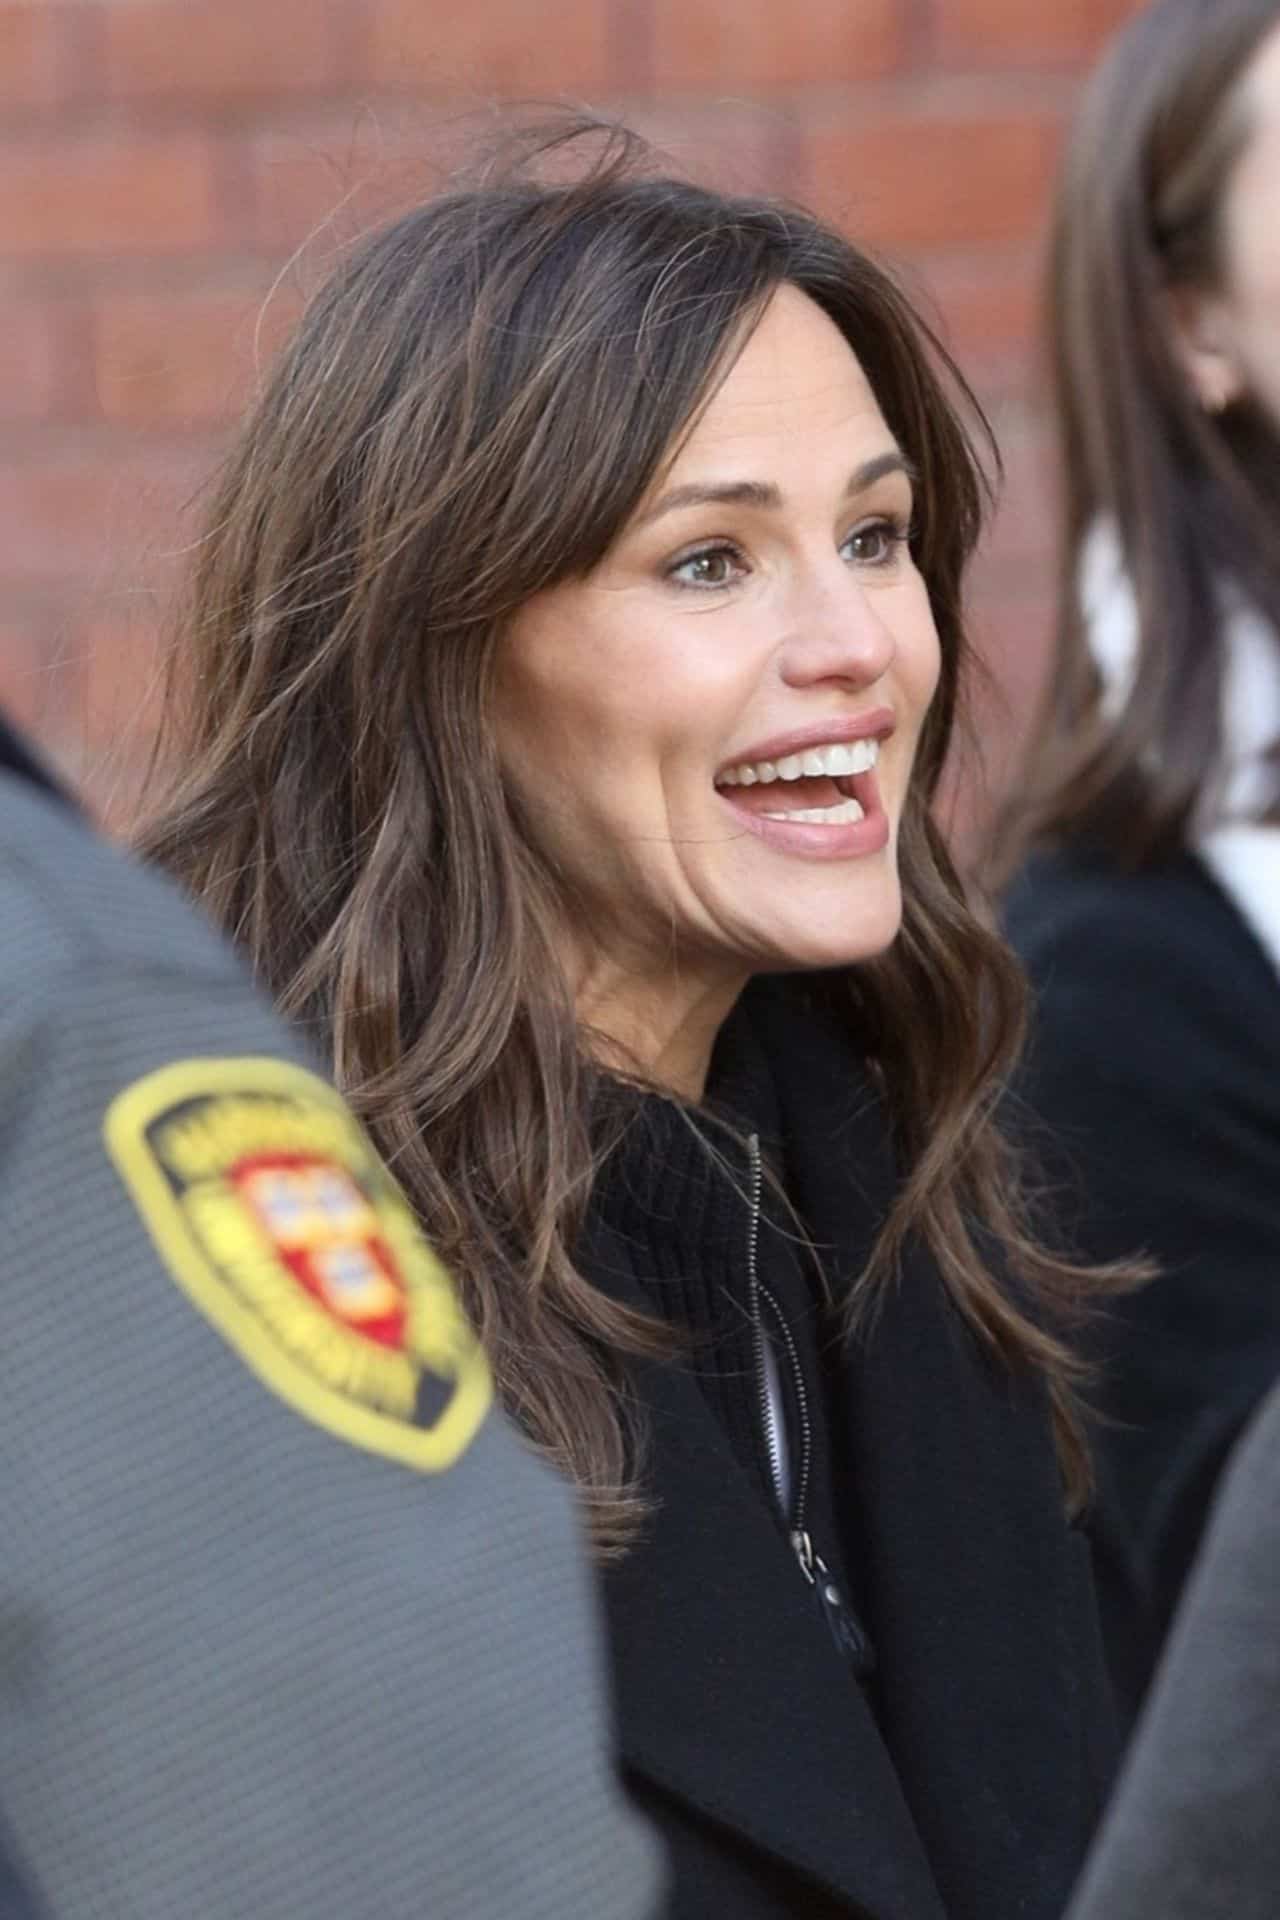 Jennifer Garner Honored as Hasty Pudding's Woman of the Year 2022